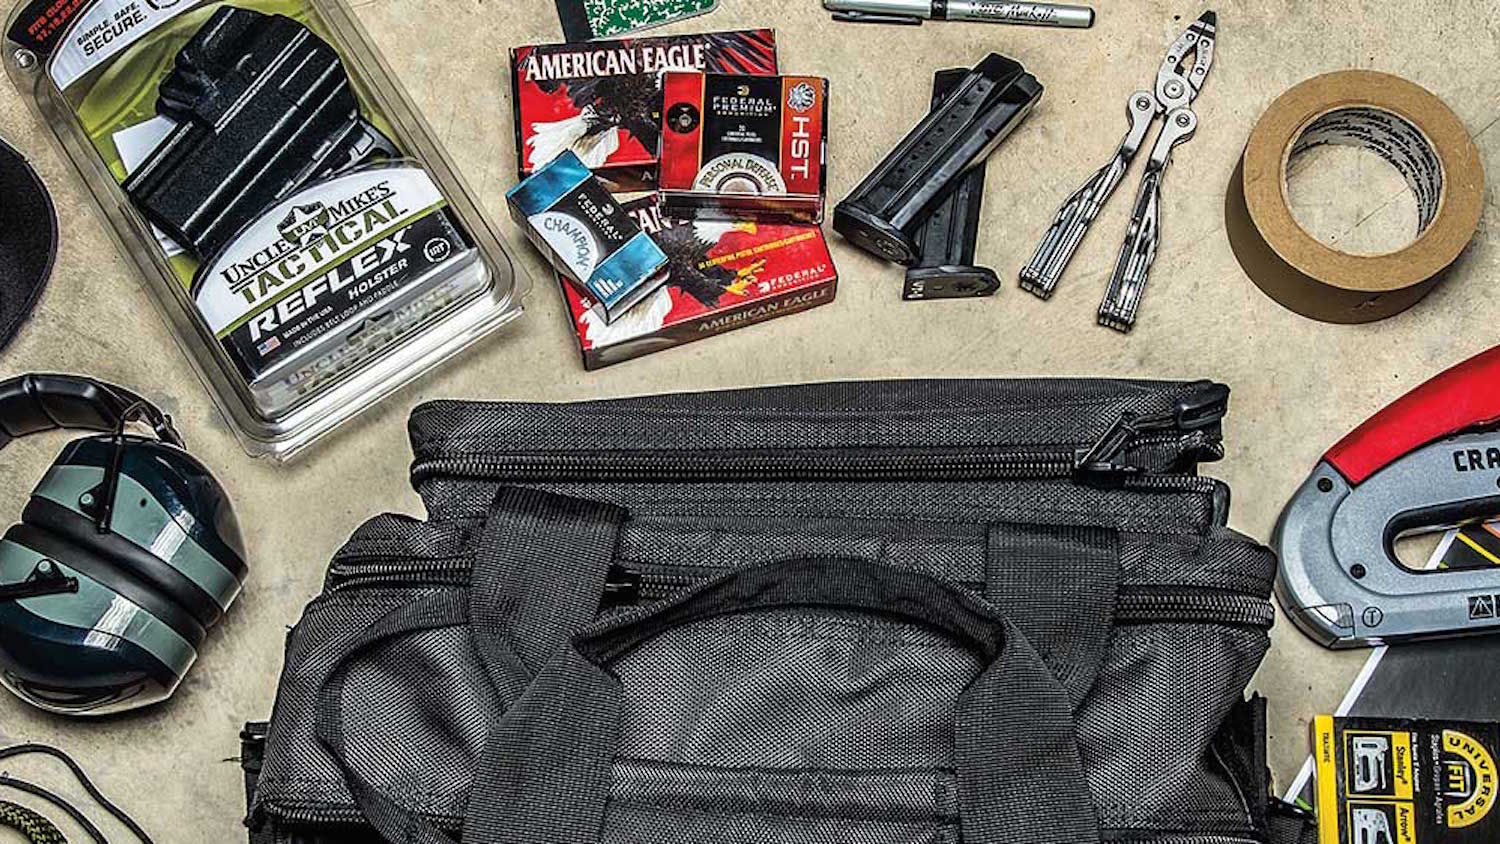 America’s Rifle: What’s in the Range Bag?